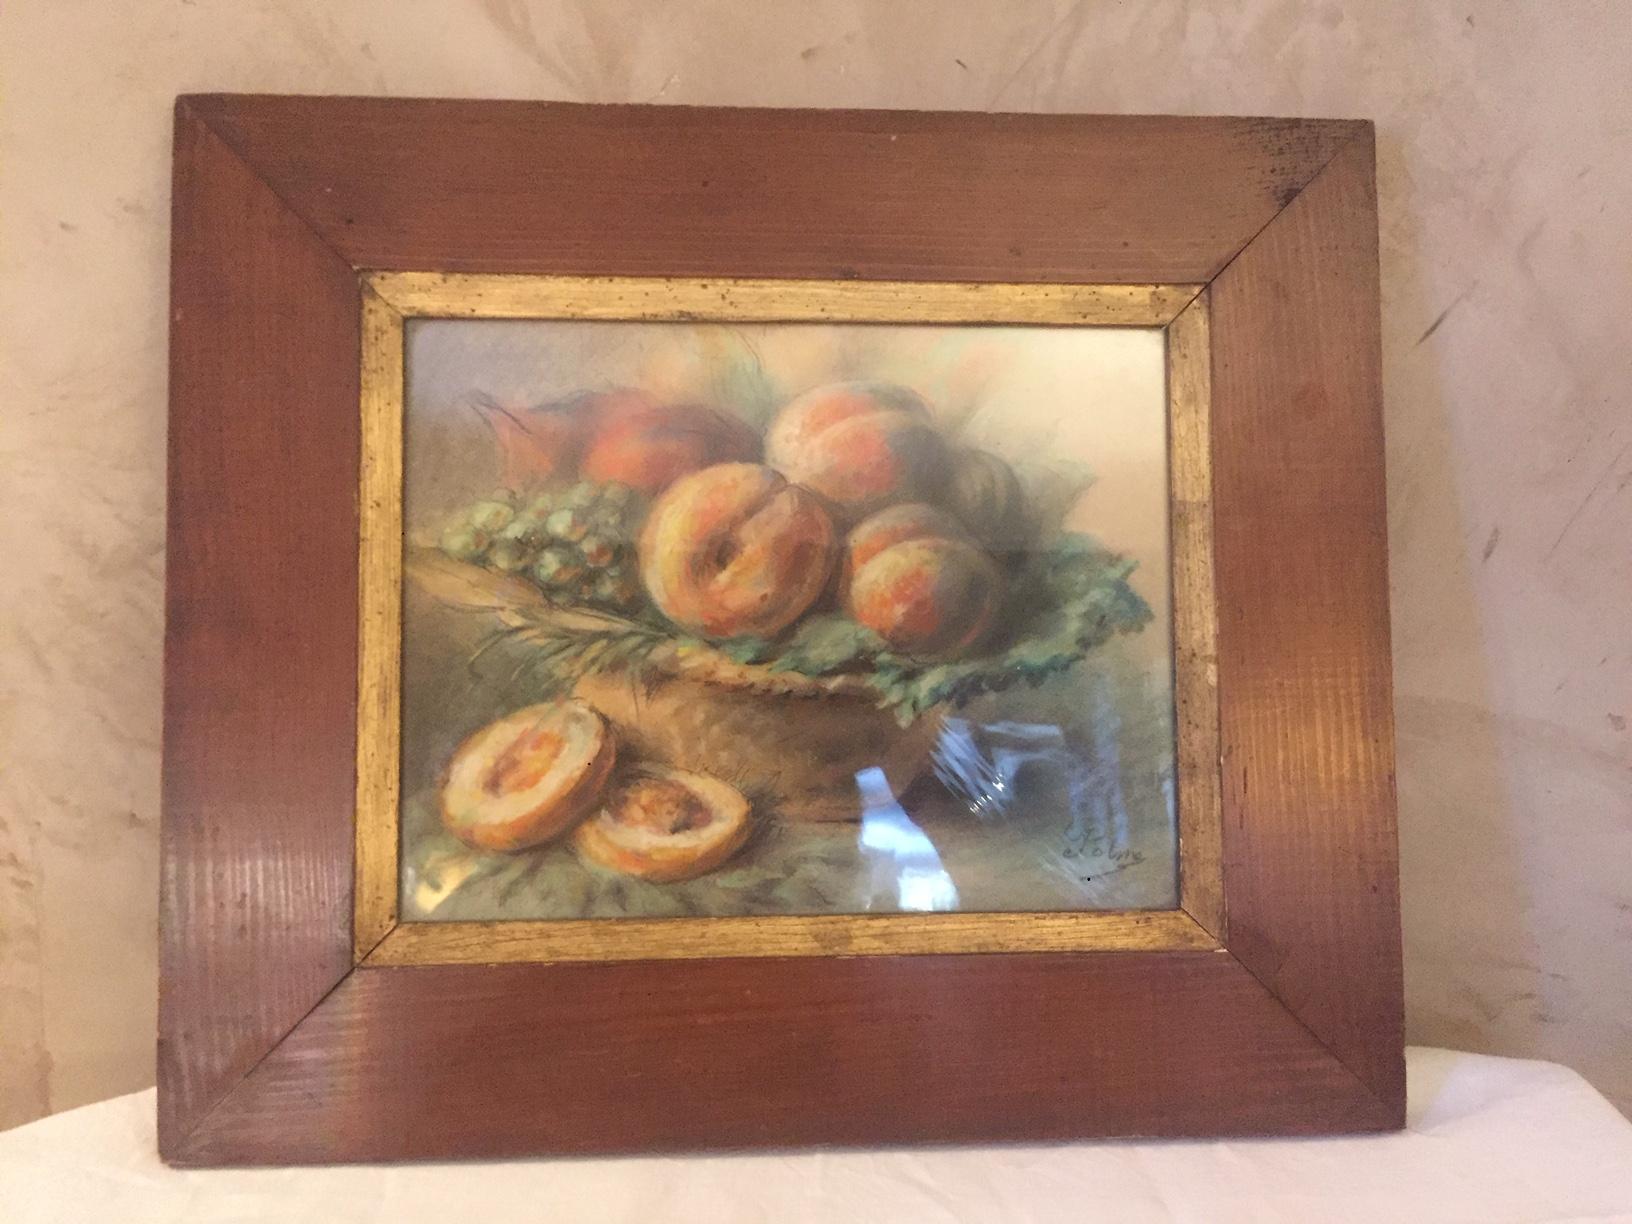 Very nice 20th century French Pastel drawing signed on the right bottom 